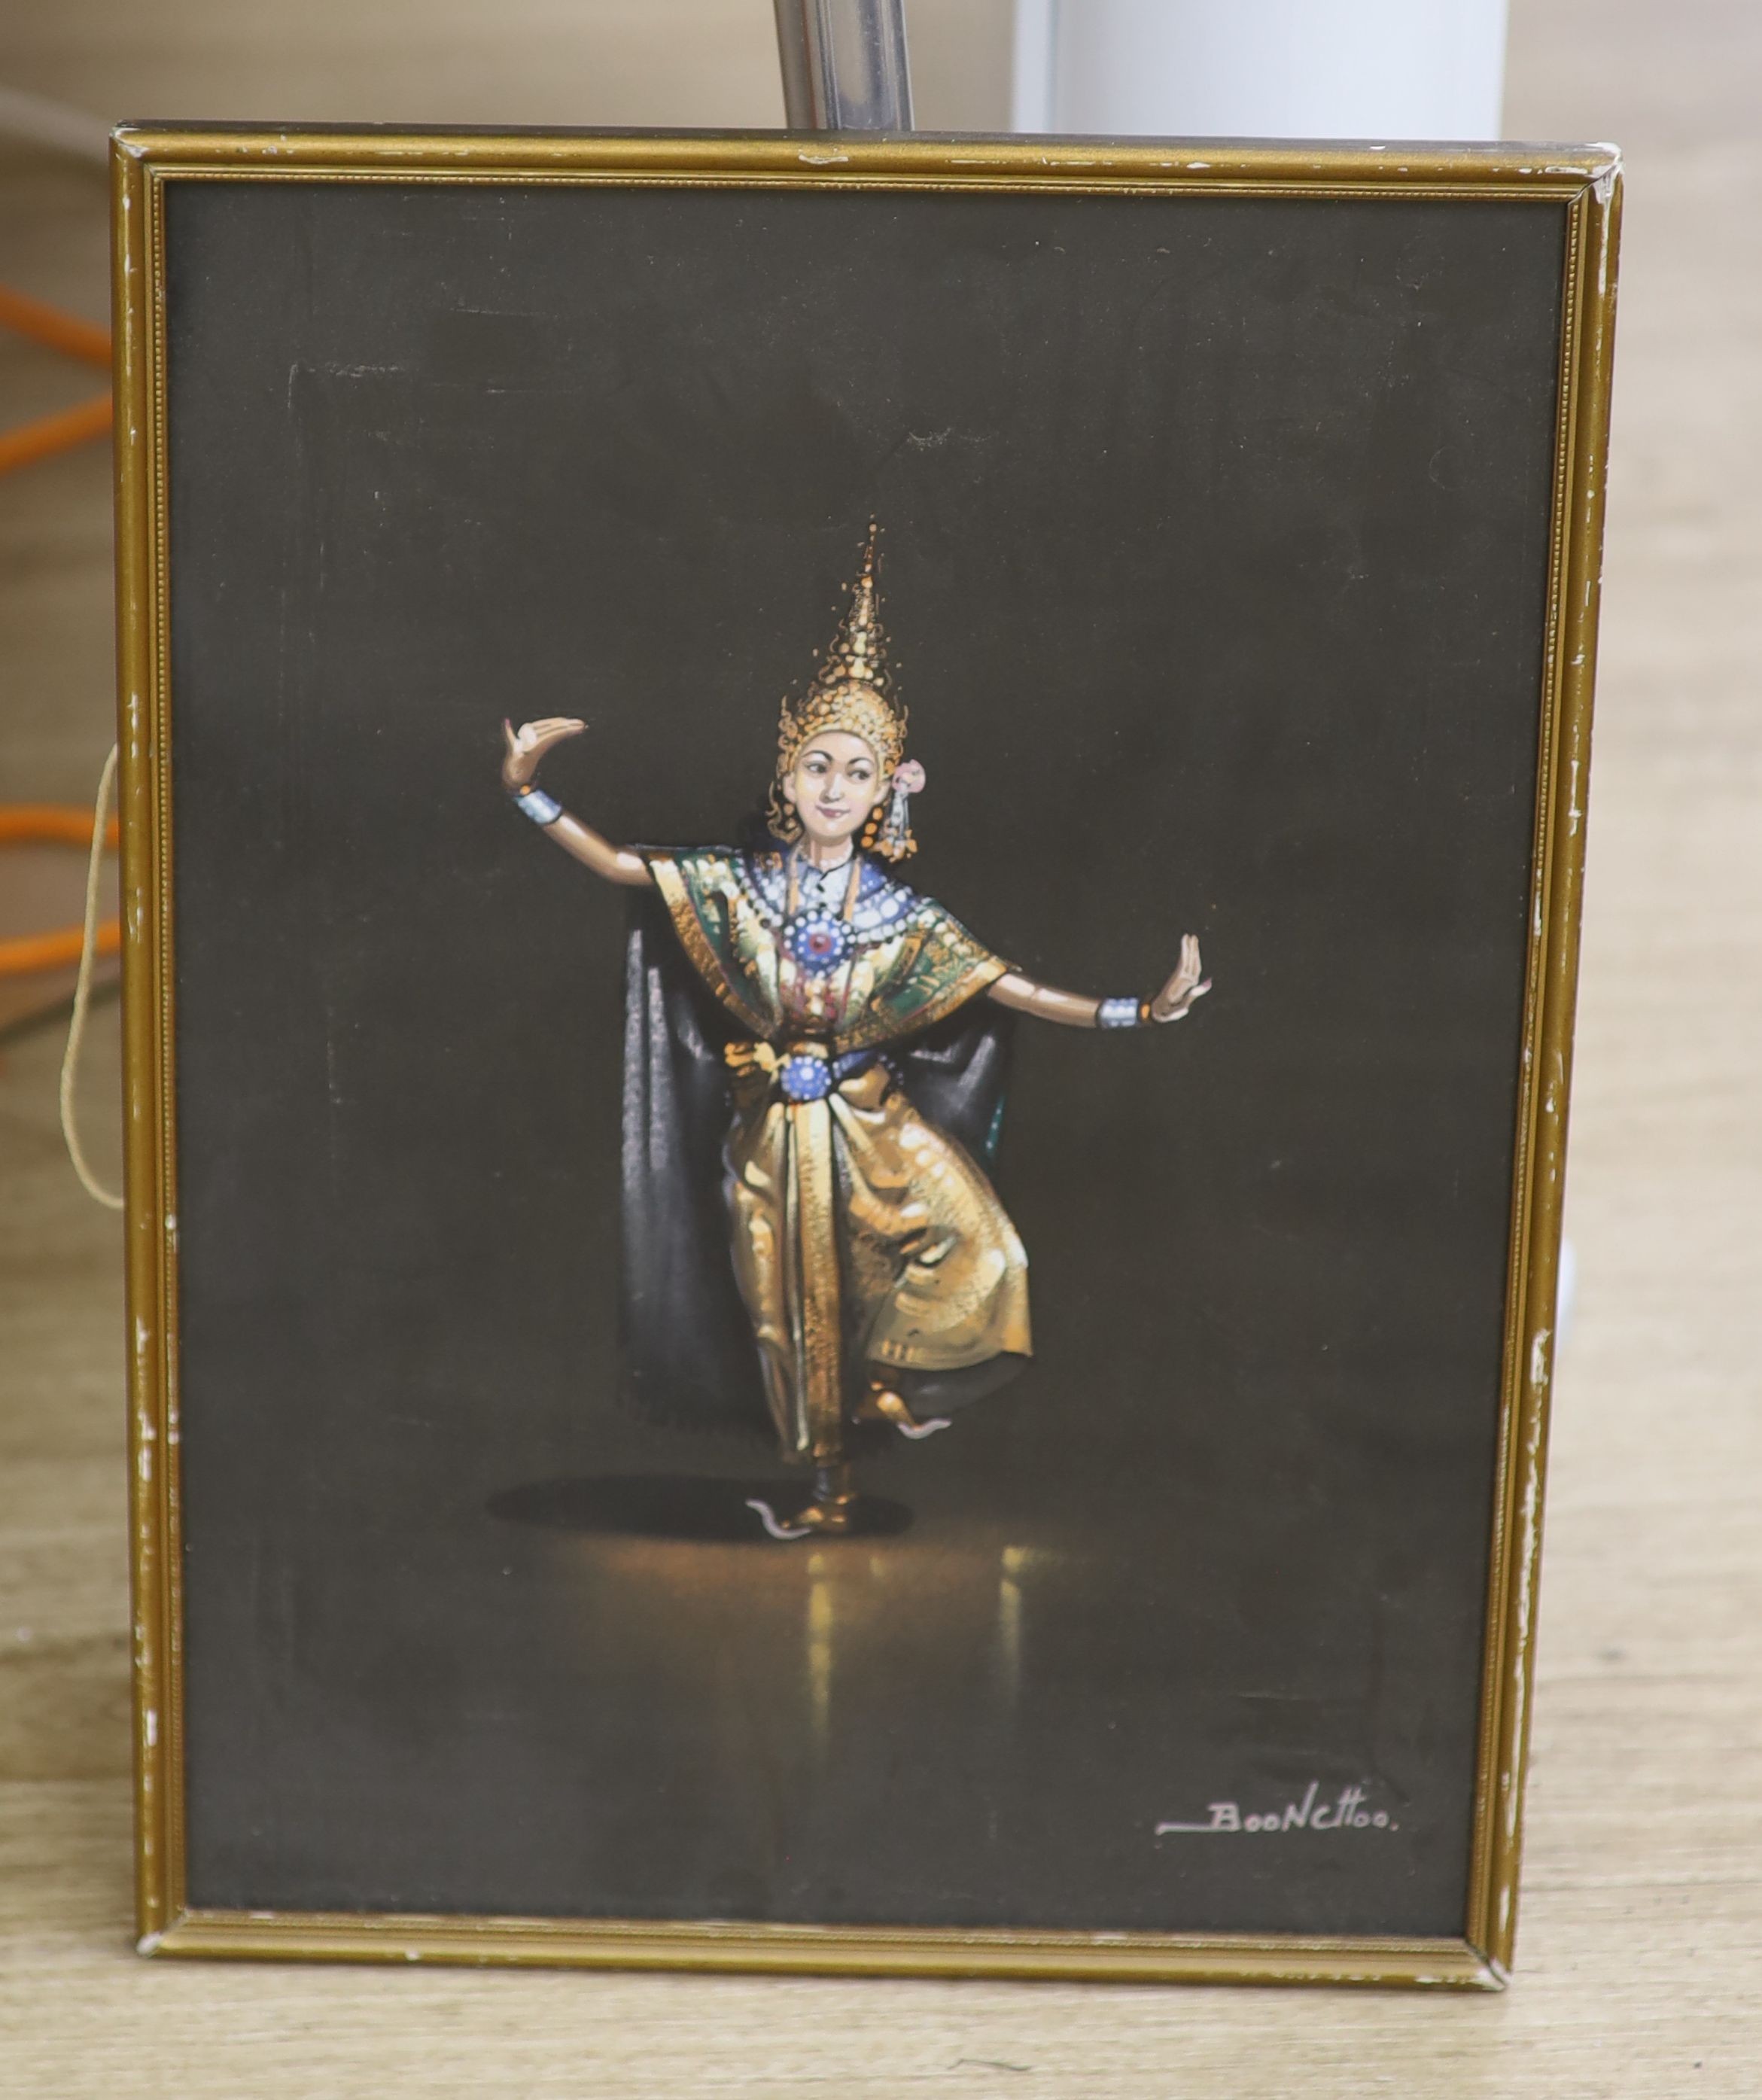 Booncttoo, gouache on black paper, Siamese dancer, signed, 36 x 26cm - Image 2 of 2